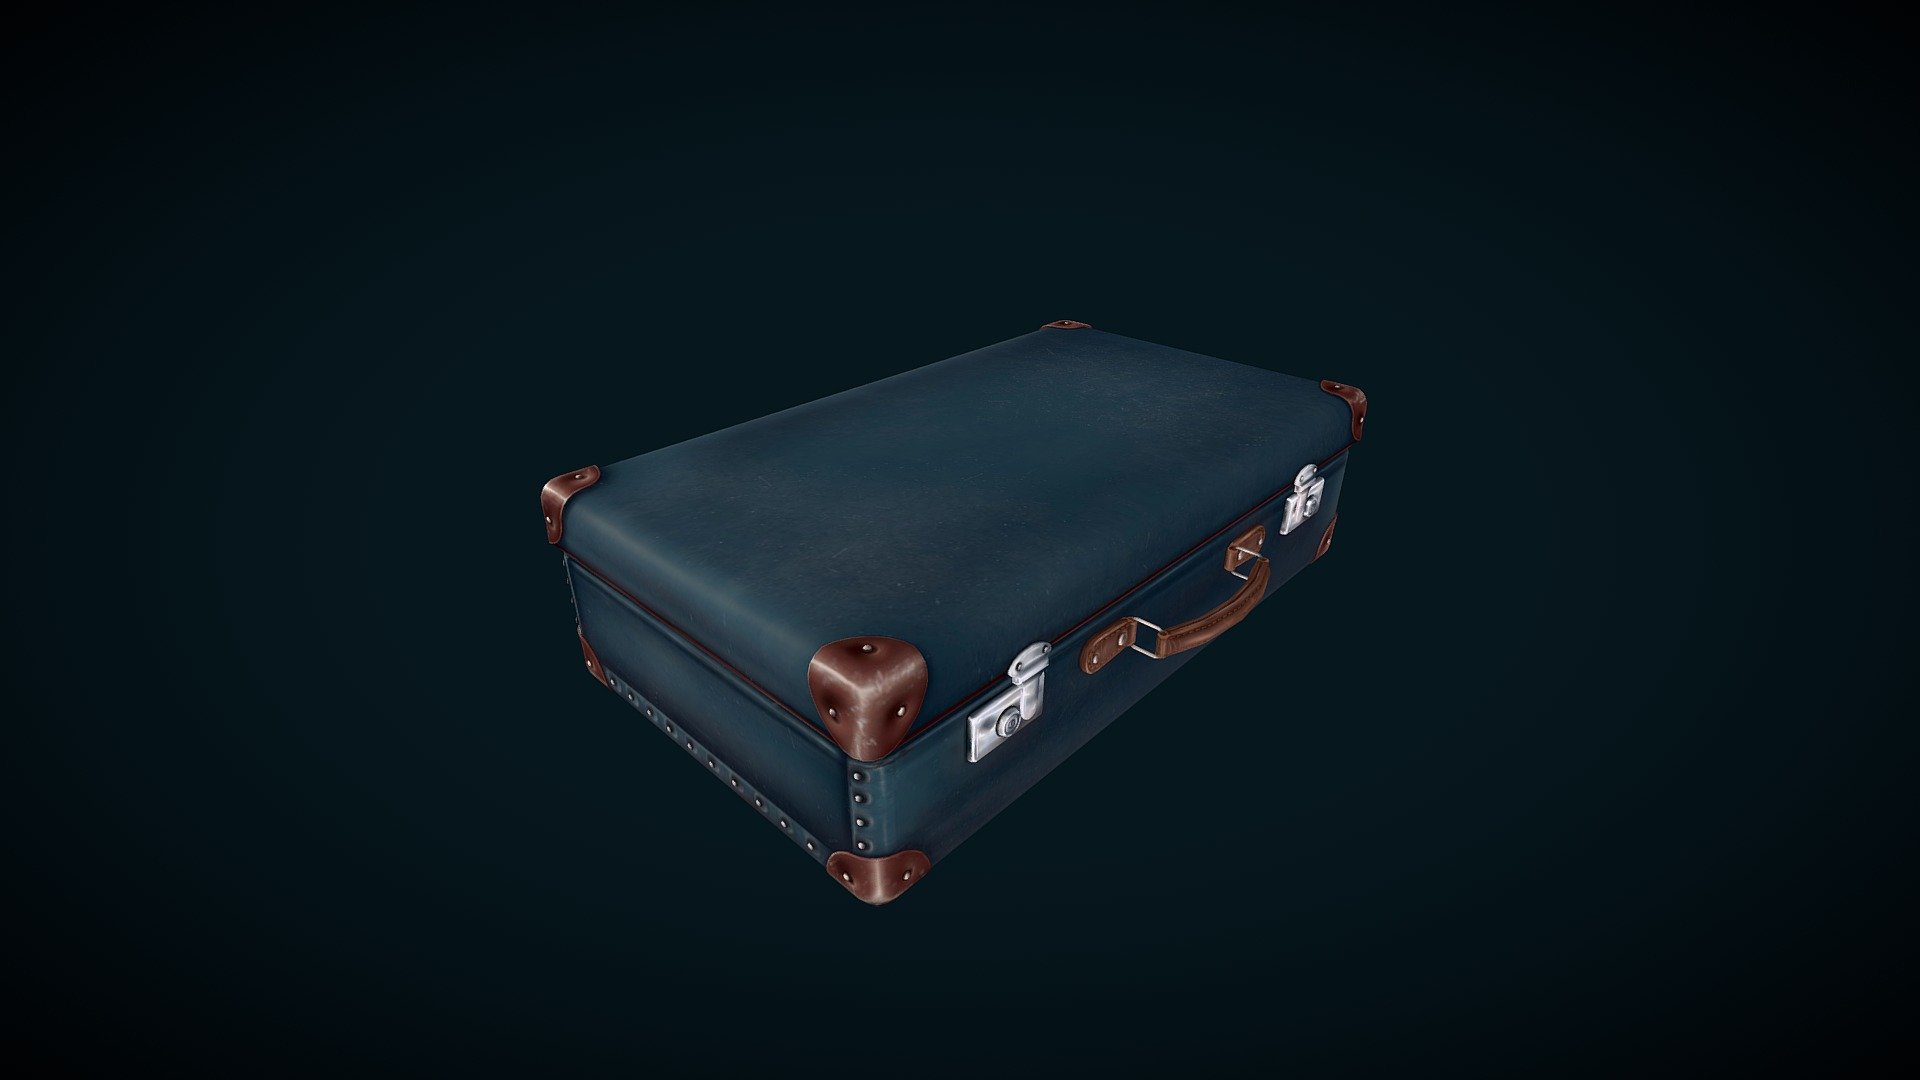 Here's my last project of the summer break. A little warmup for my last year of uni. The idea came from an old suitcase I own that has all my old school stuff in it! However, I thought that if I'm making an asset, it deserved something a little more interesting inside :P

Modelled/animated in Blender, and handpainted in Substance Painter! - A Case of Space - 3D model by AyyZerr 3d model